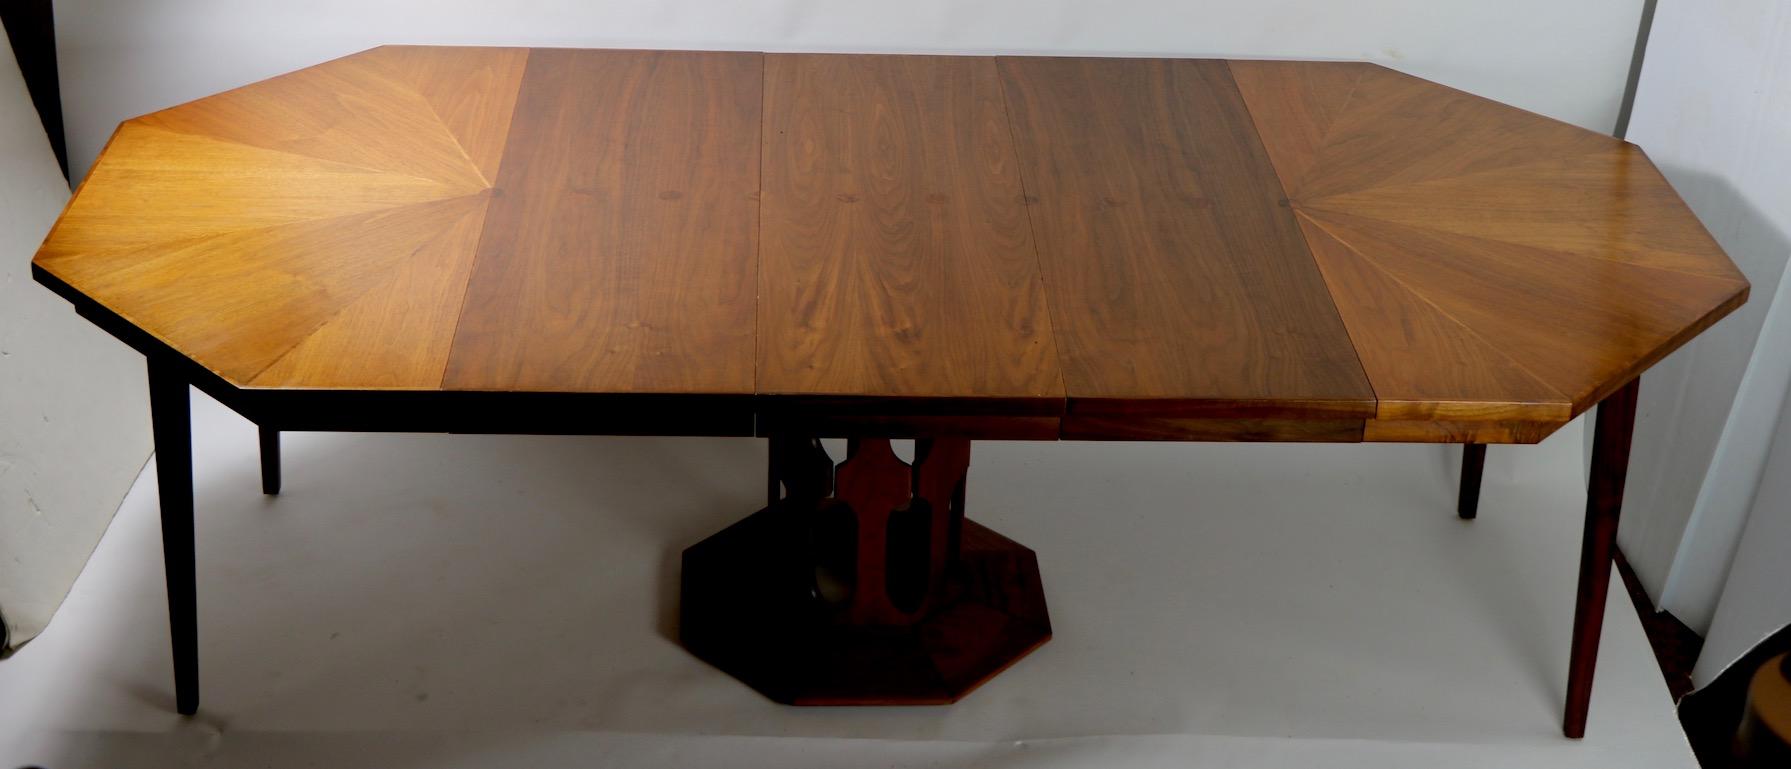 octagonal dining table